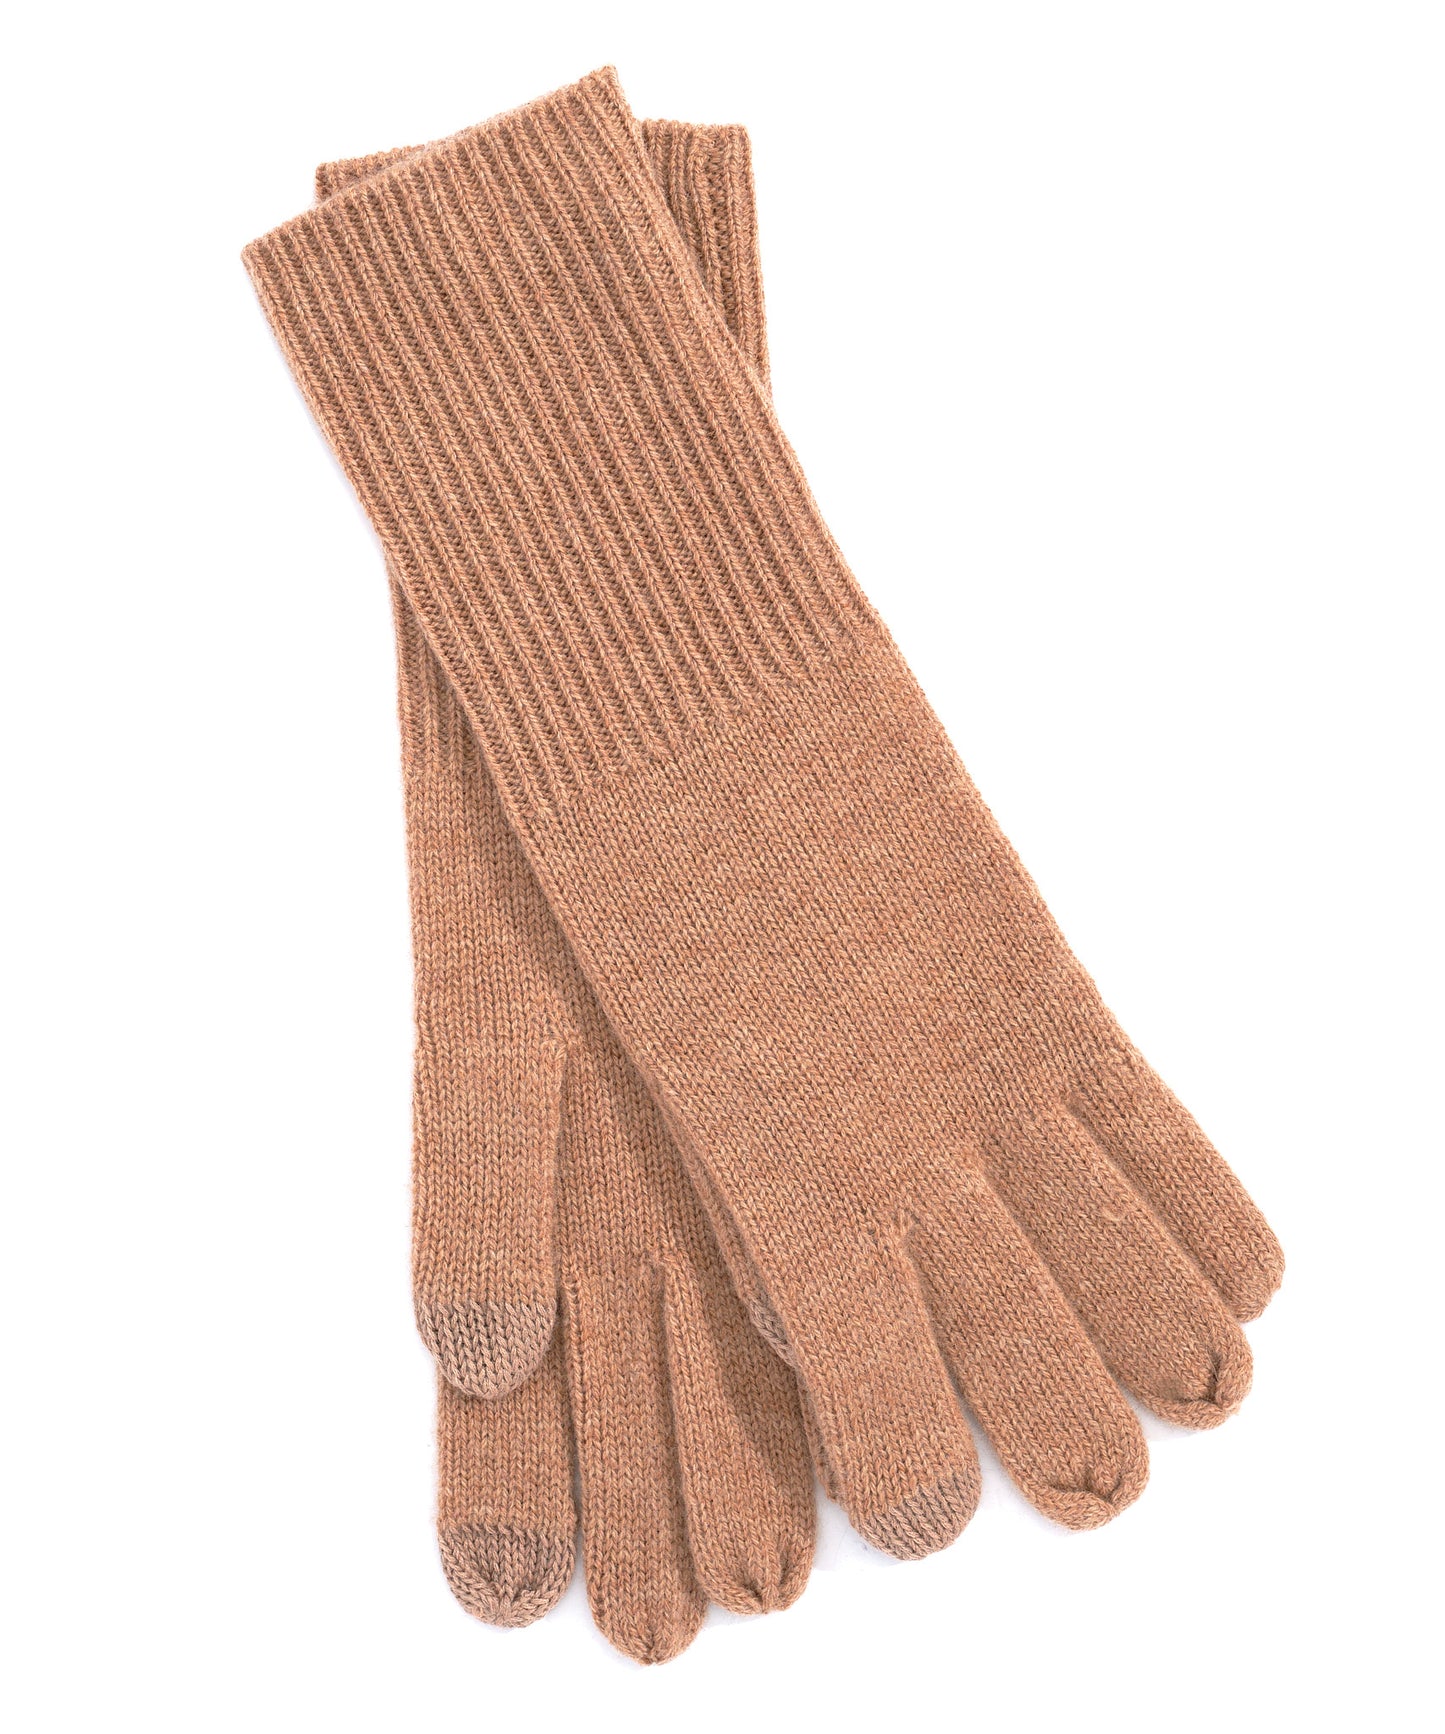 Wool/Cashmere  Gloves in color Camel Heather